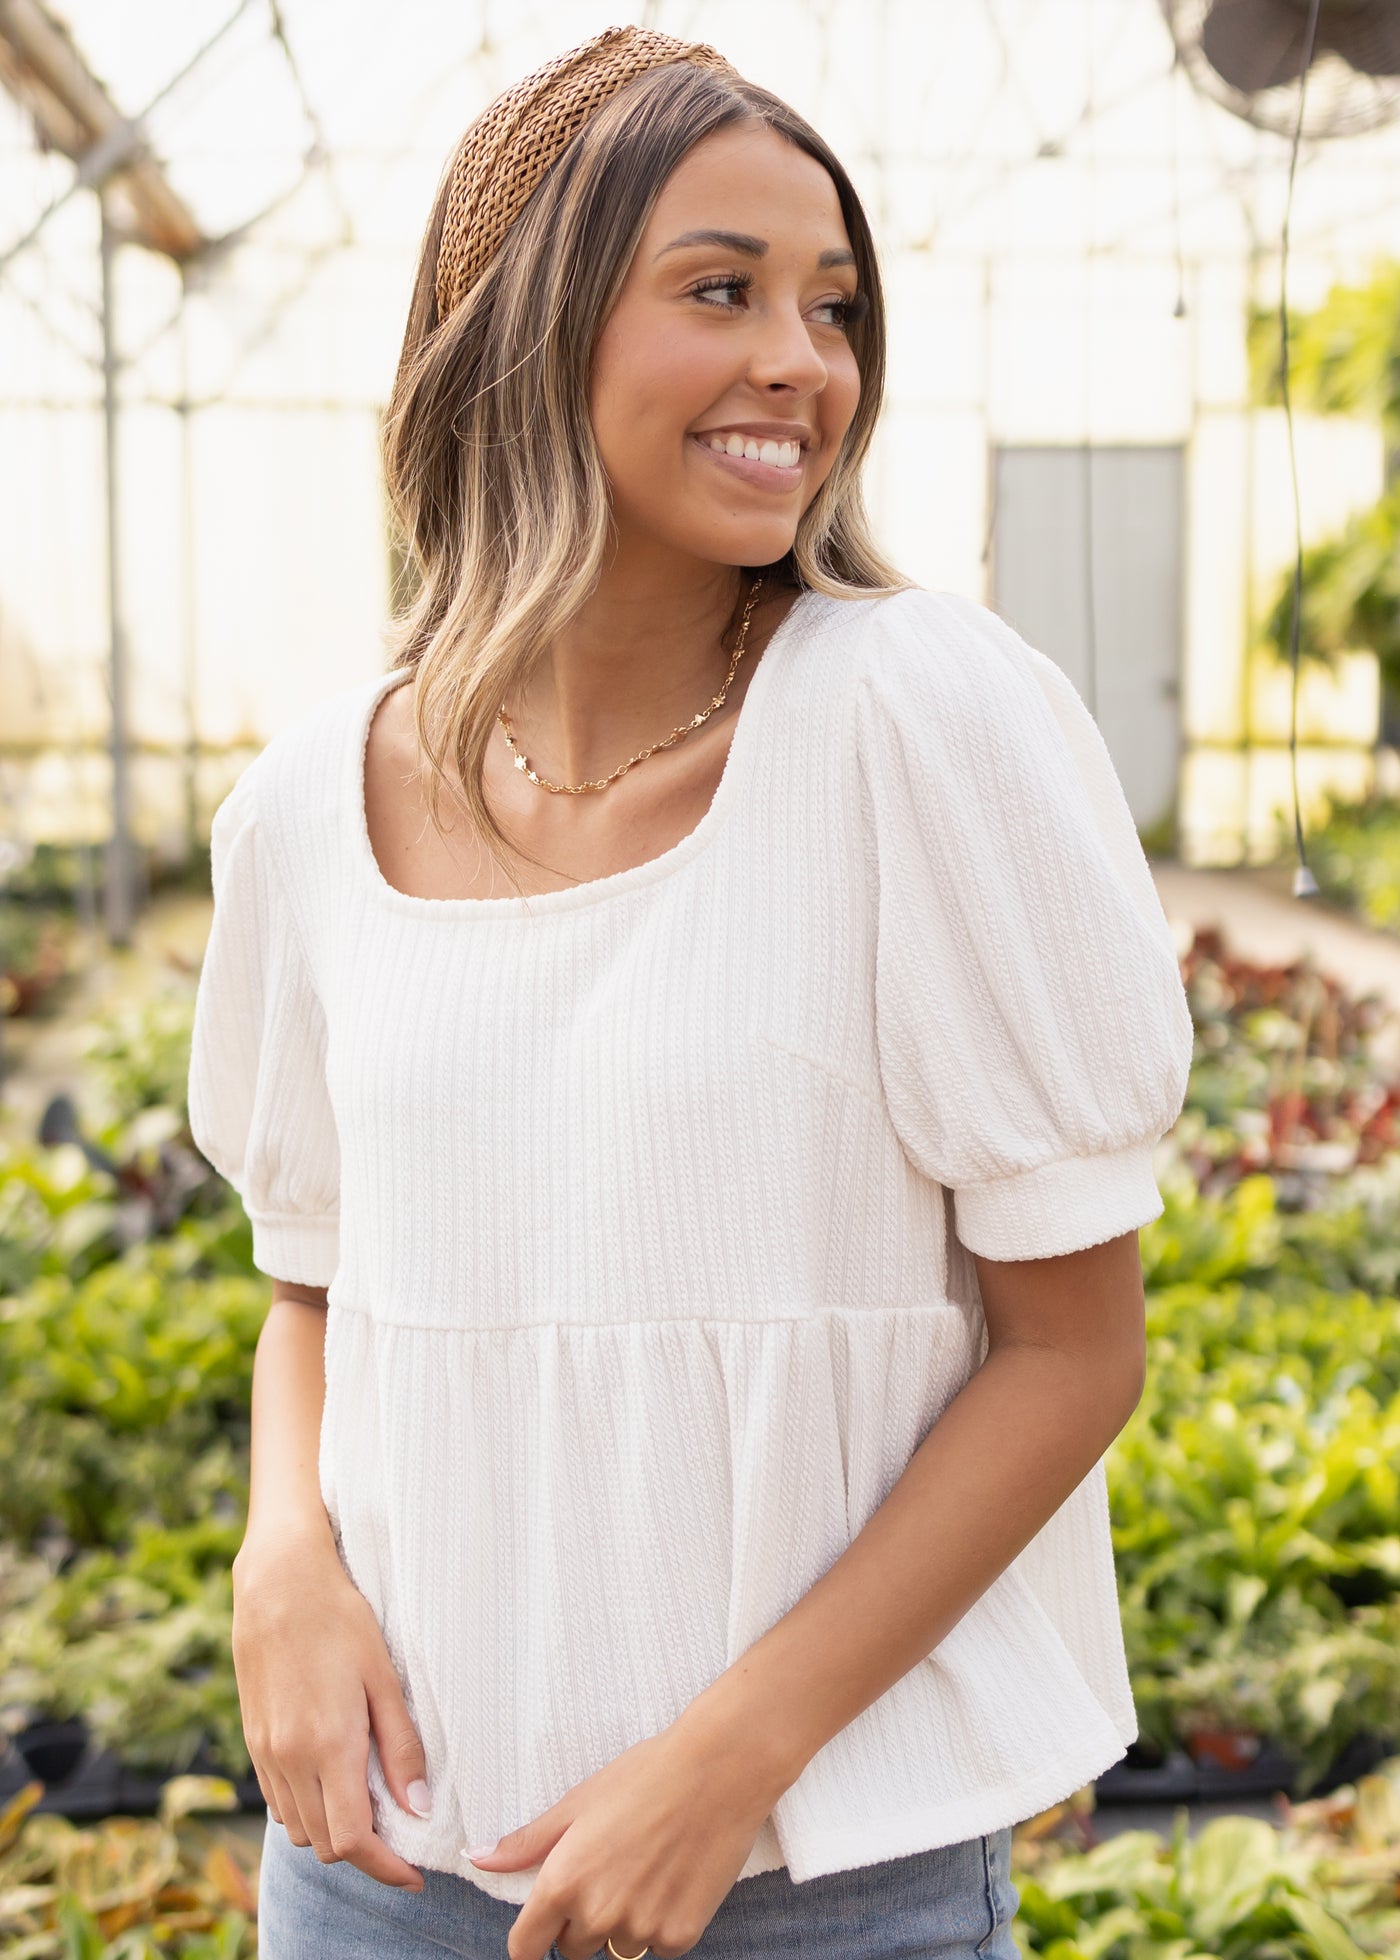 Short puff sleeves of an ivory top